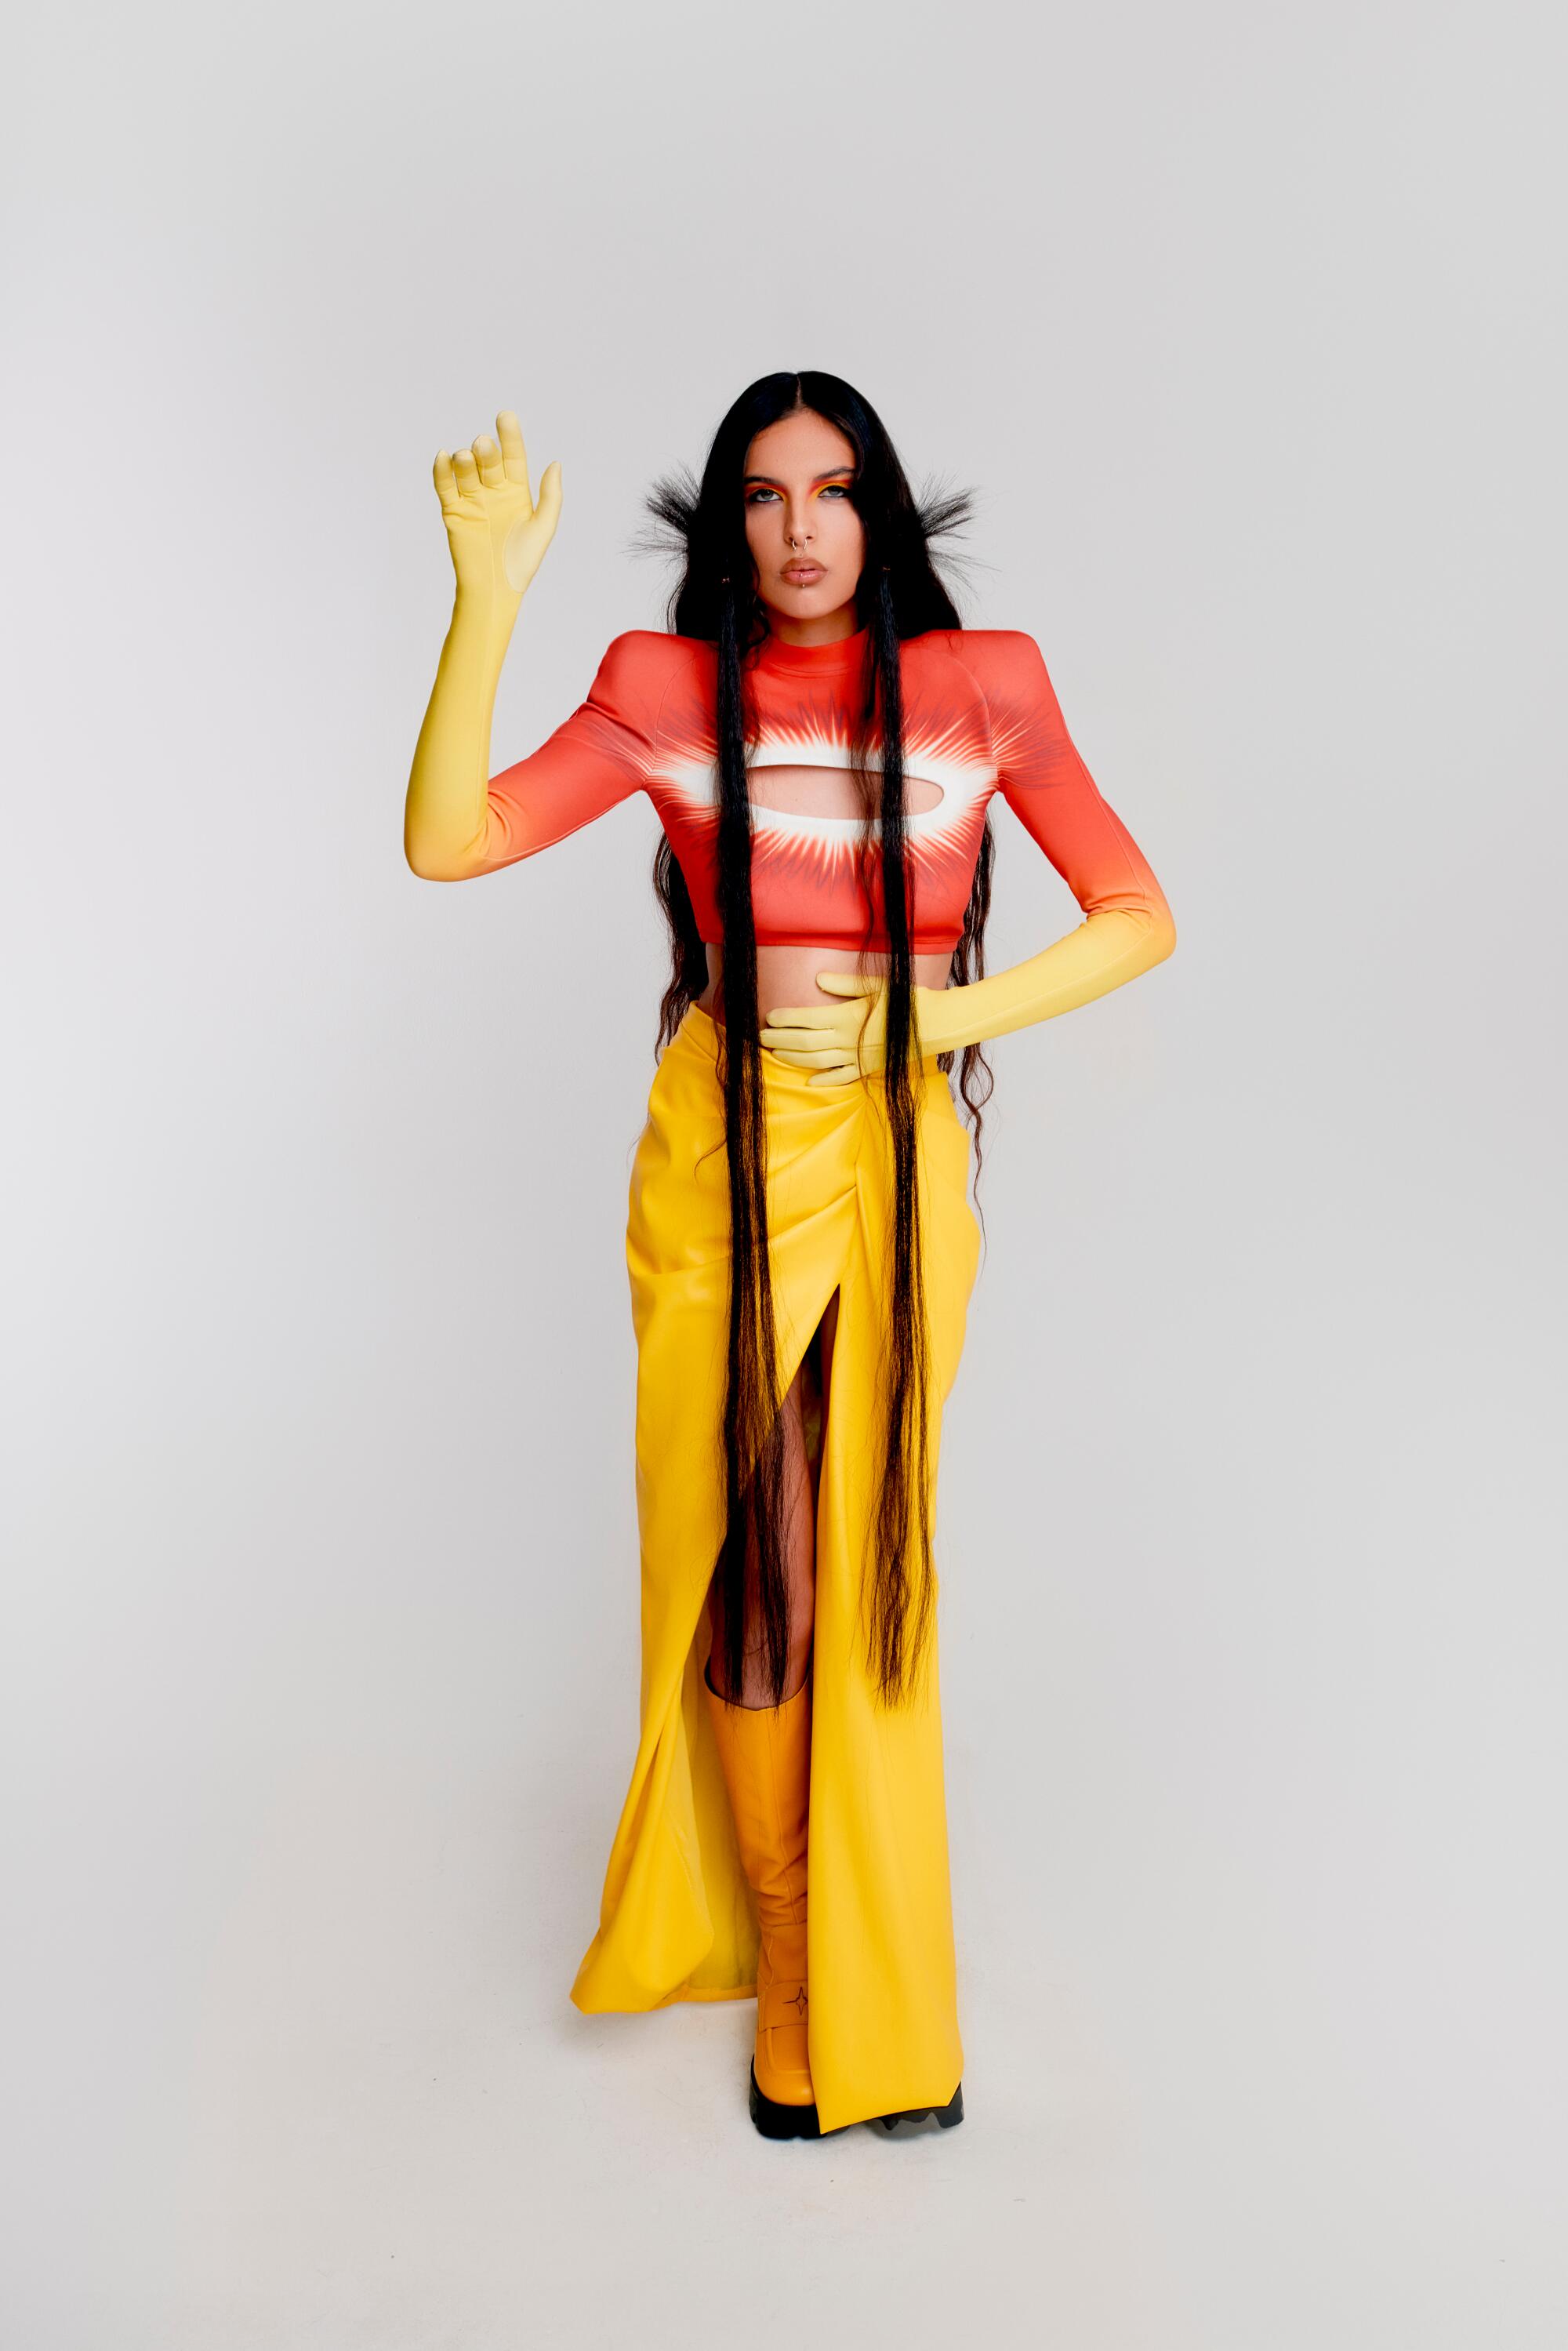 A woman wearings a red and yellow outfit, evoking the sun.